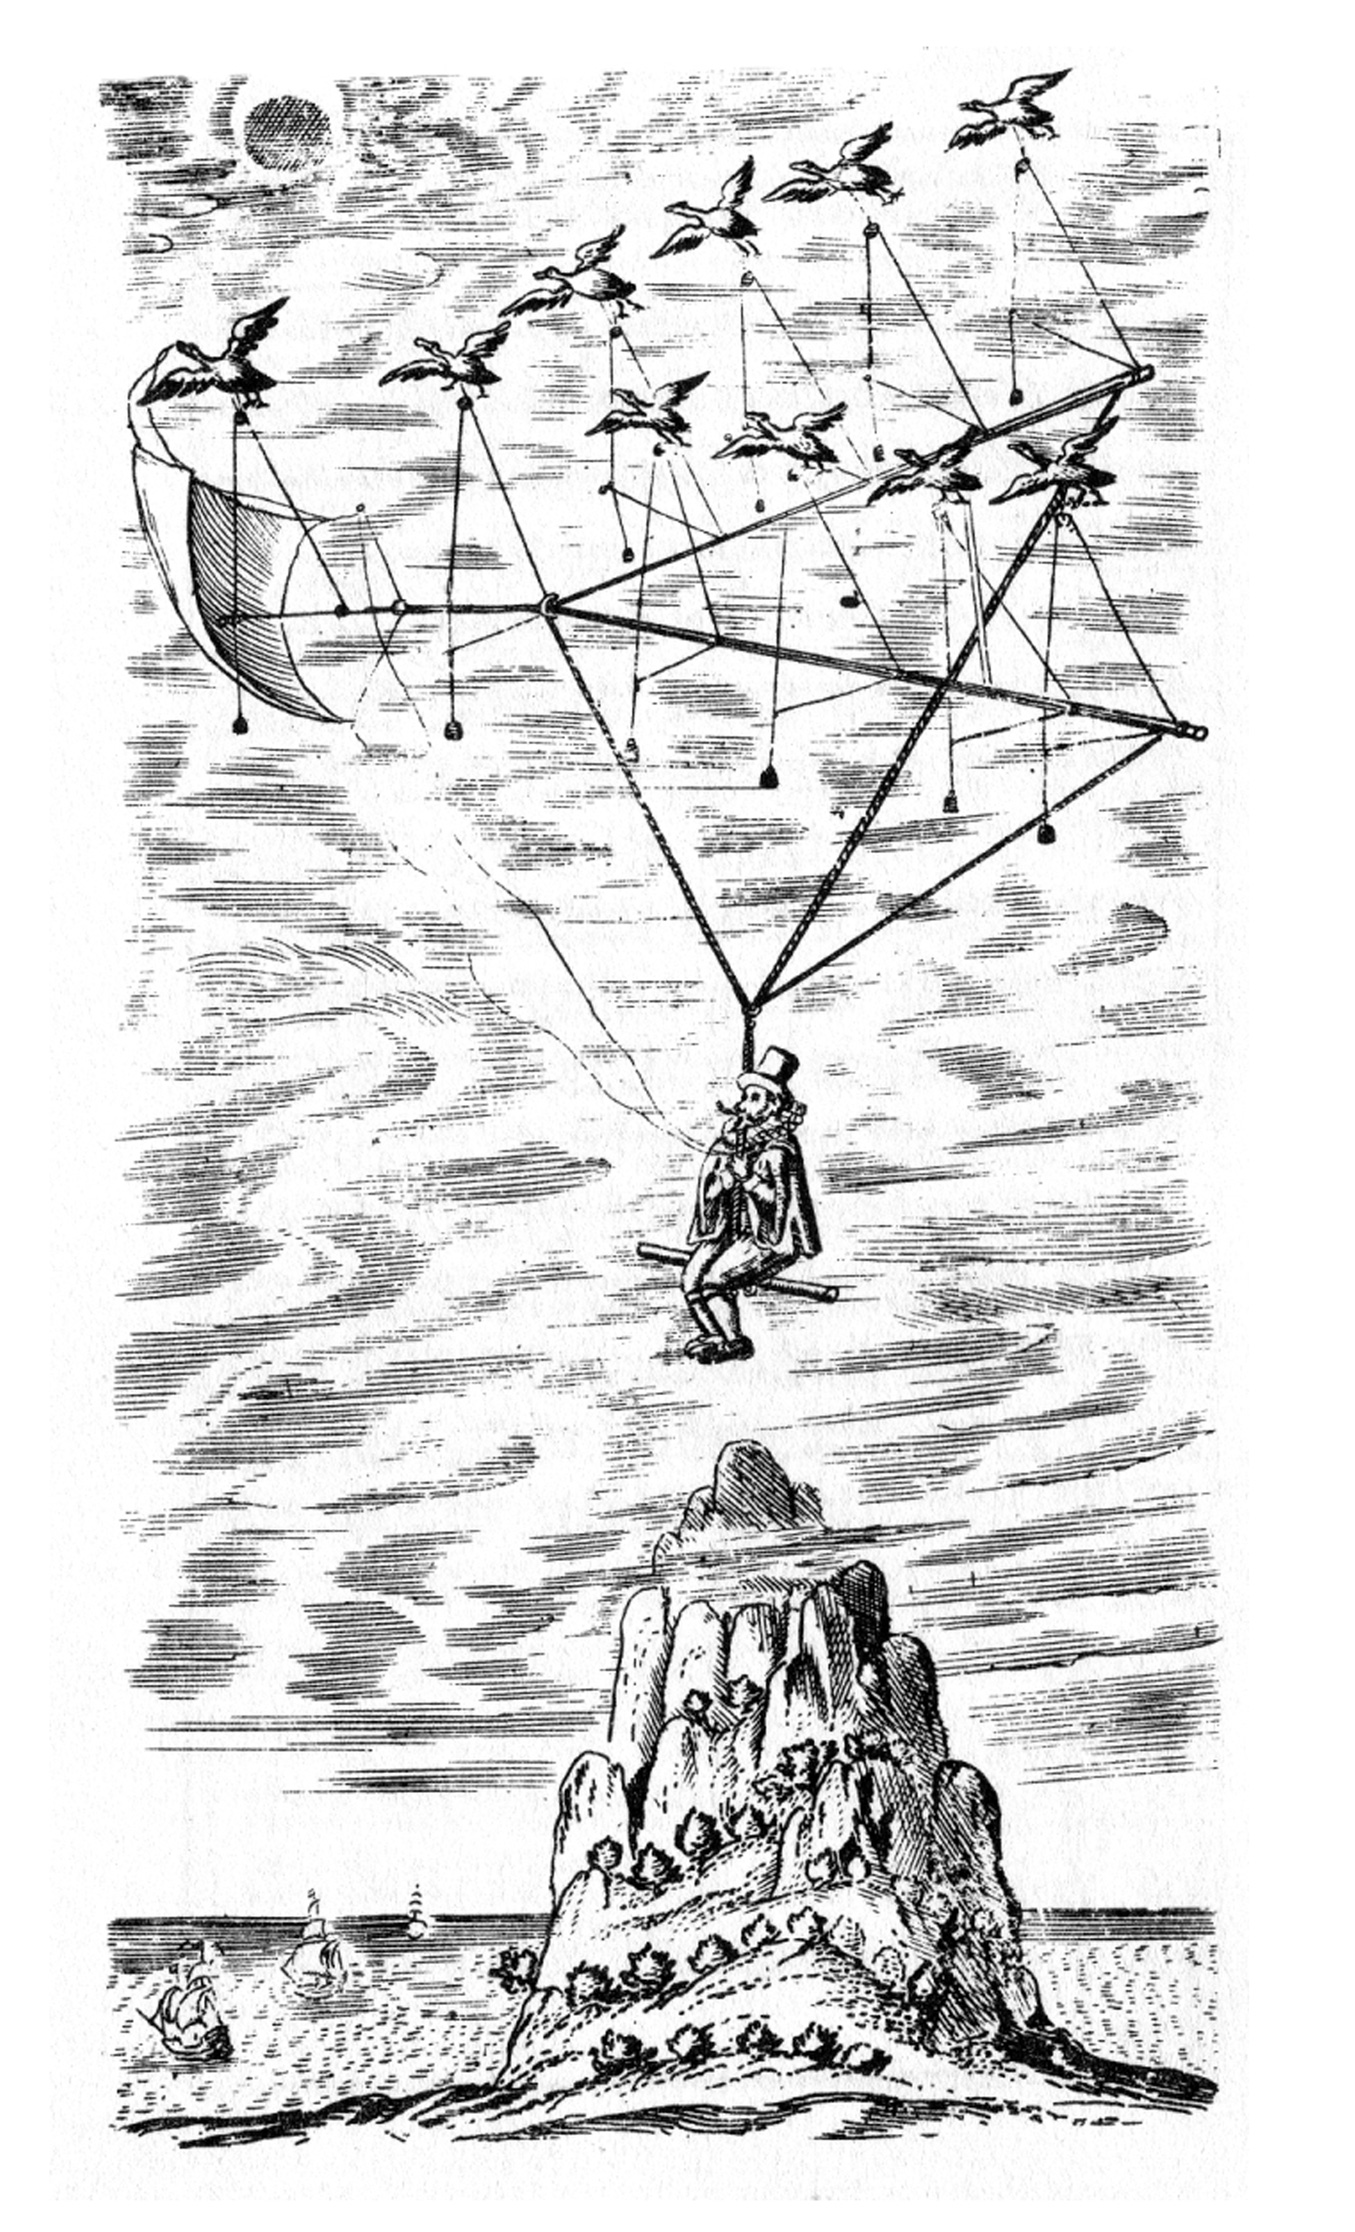 Godwin’s scheme for a bird-powered
flying machine, from his 1638 book
The Man on the Moone, or, A Discourse
of a Voyage Thither.